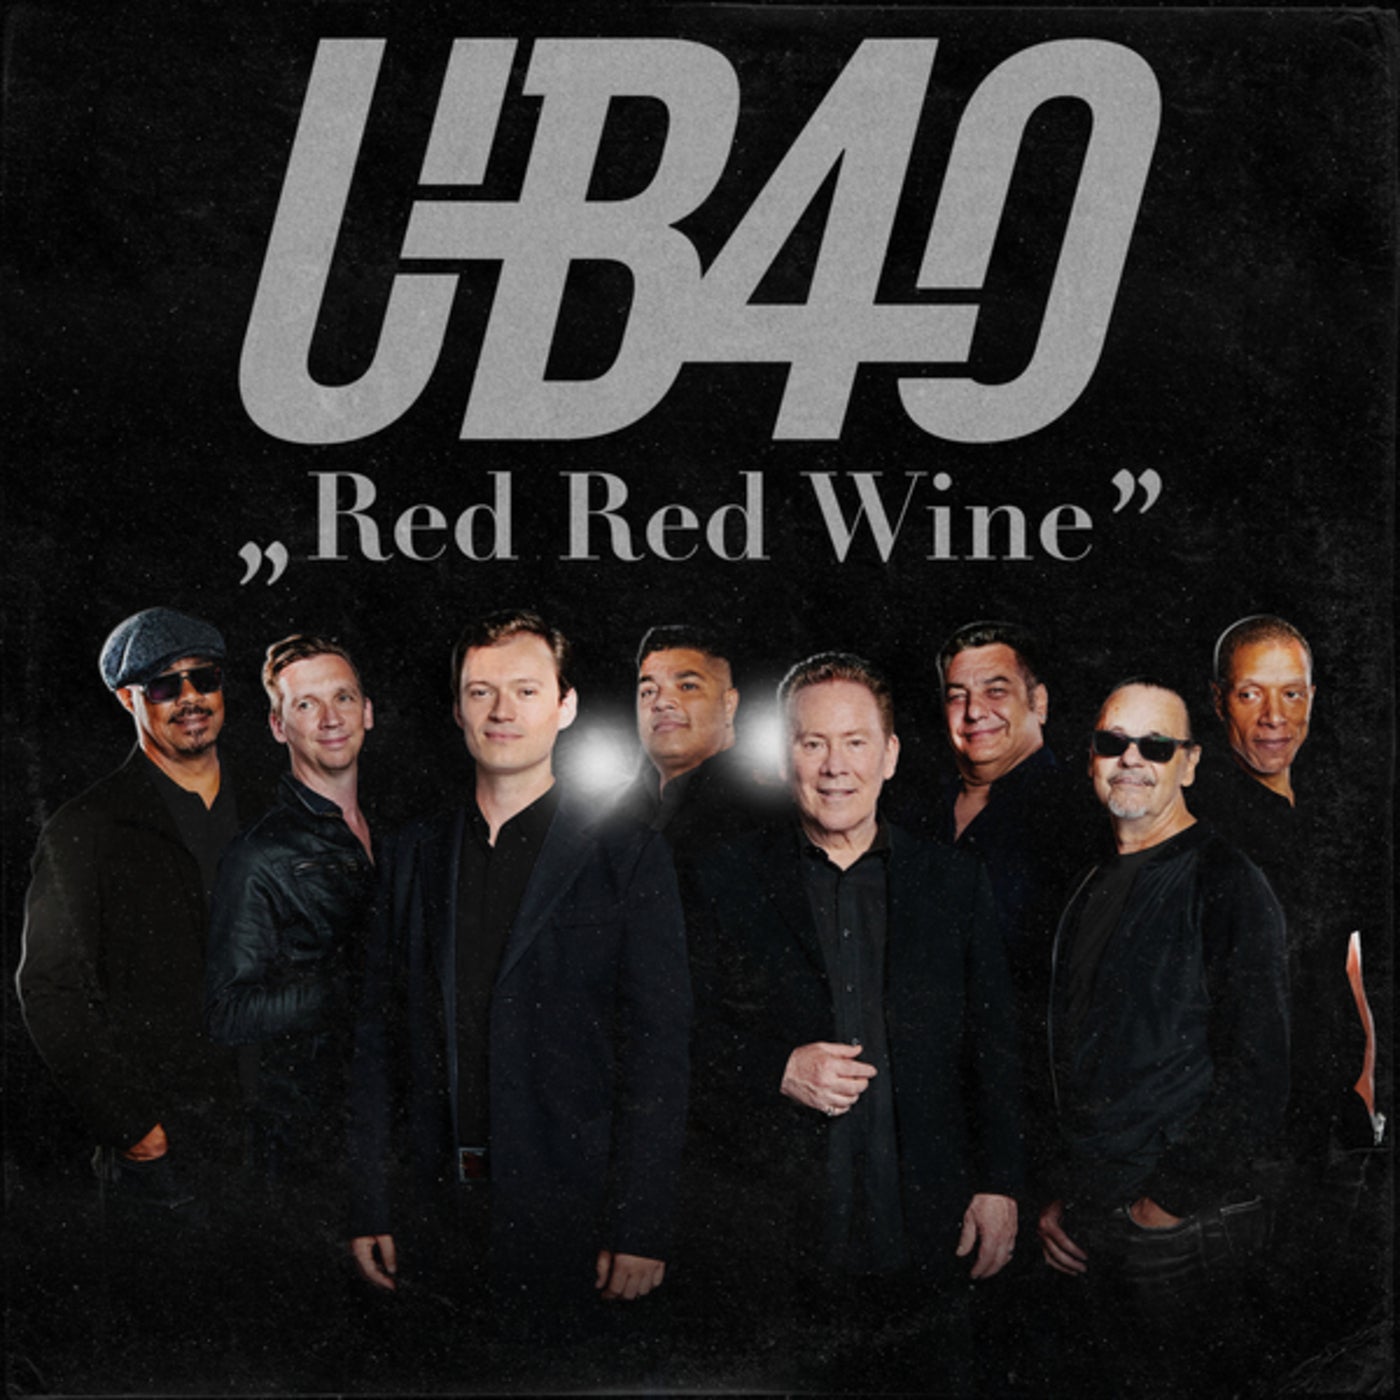 plade bungee jump fup Red Red Wine by UB40 on Beatsource